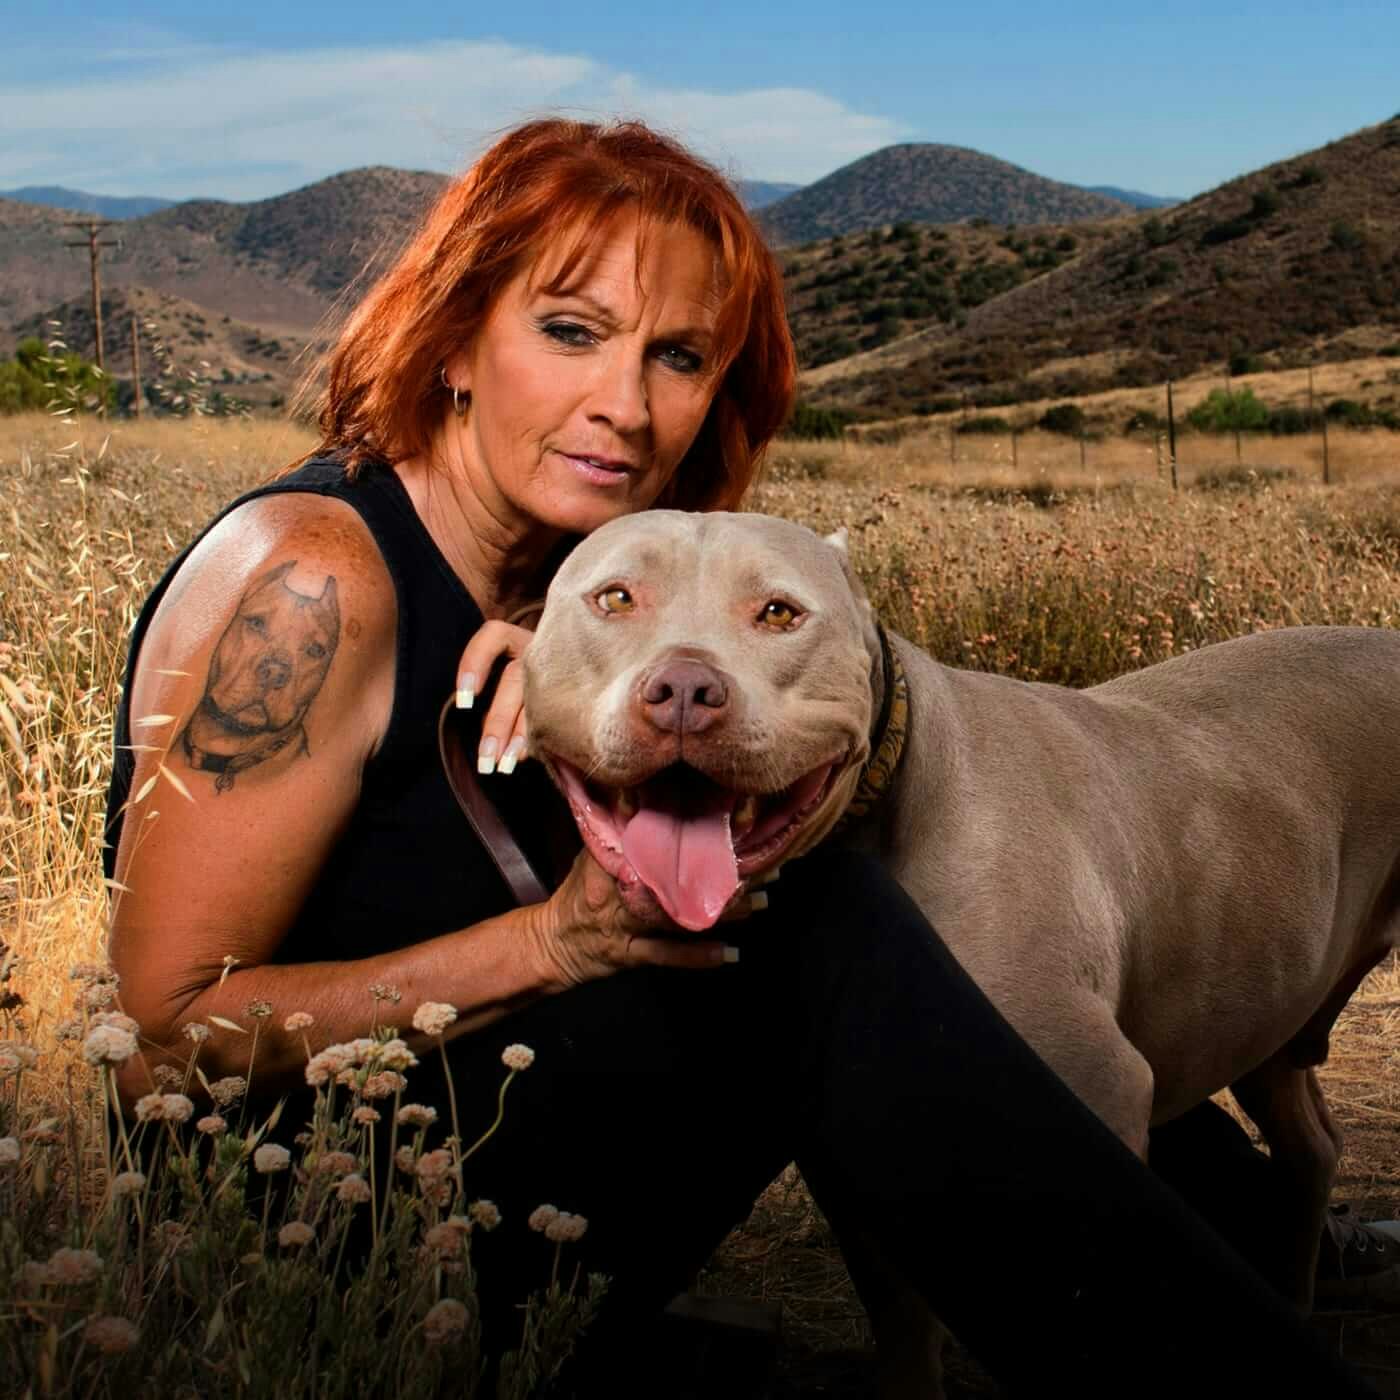 Stream 'Pit Bulls and Parolees' How to Watch Online